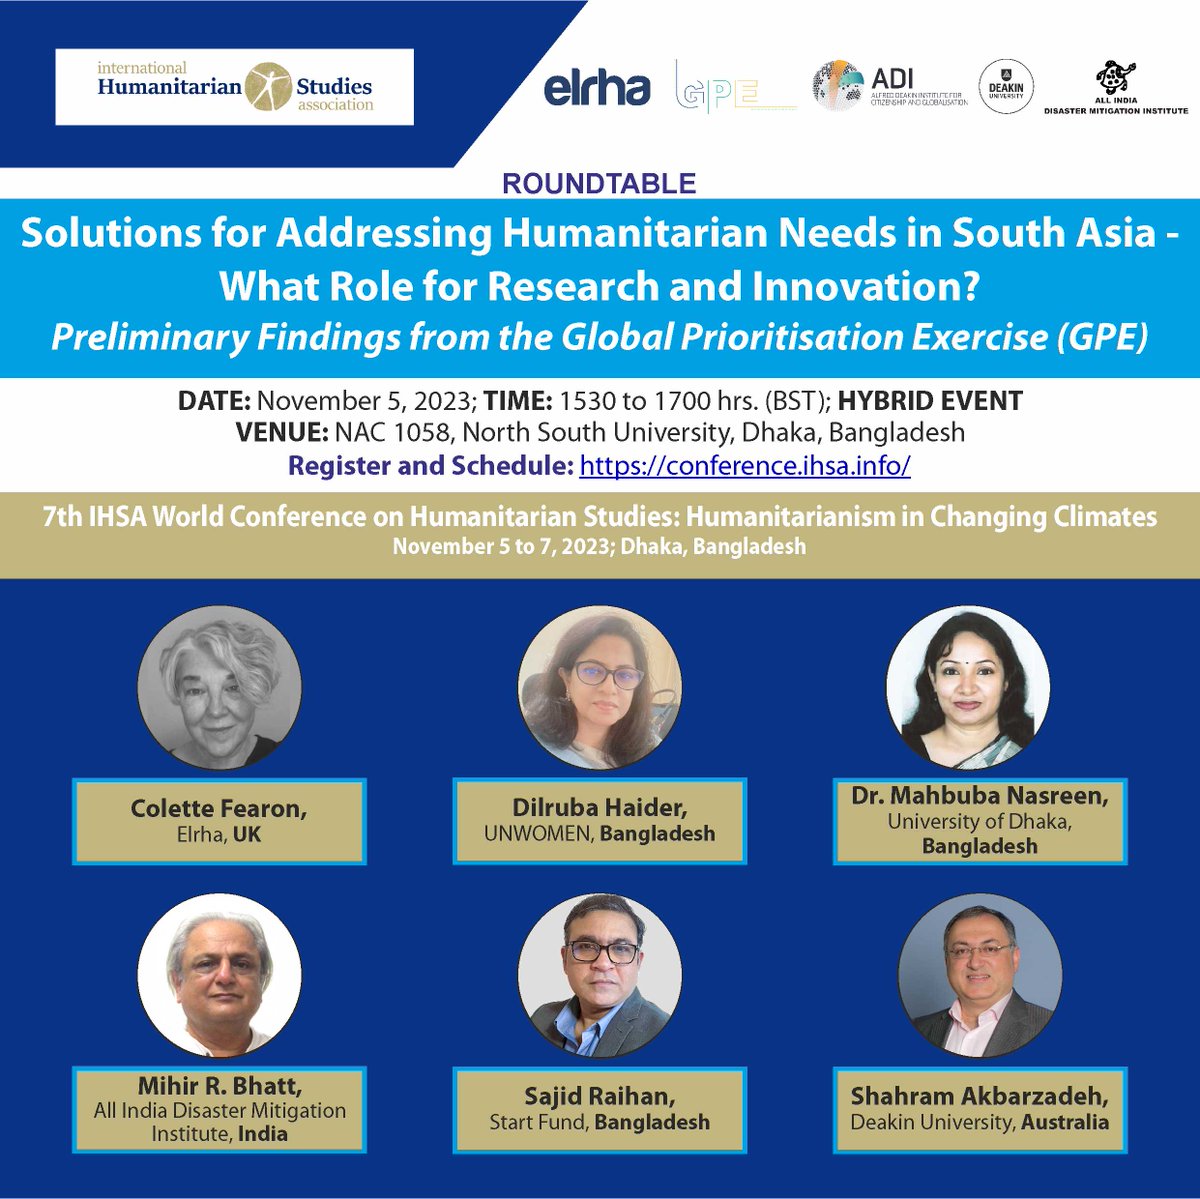 Join us in Dhaka or online to engage in a roundtable. Register and Schedule conference.ihsa.info @IHSA_studies #humanitarian #IHSAconference #ihsa #humanitarianstudies #humanitarianaction #conference @Elrha @Deakin @Deakin_ADI #TransformAid #InvestinAid #Innovators @AIDMI_ORG